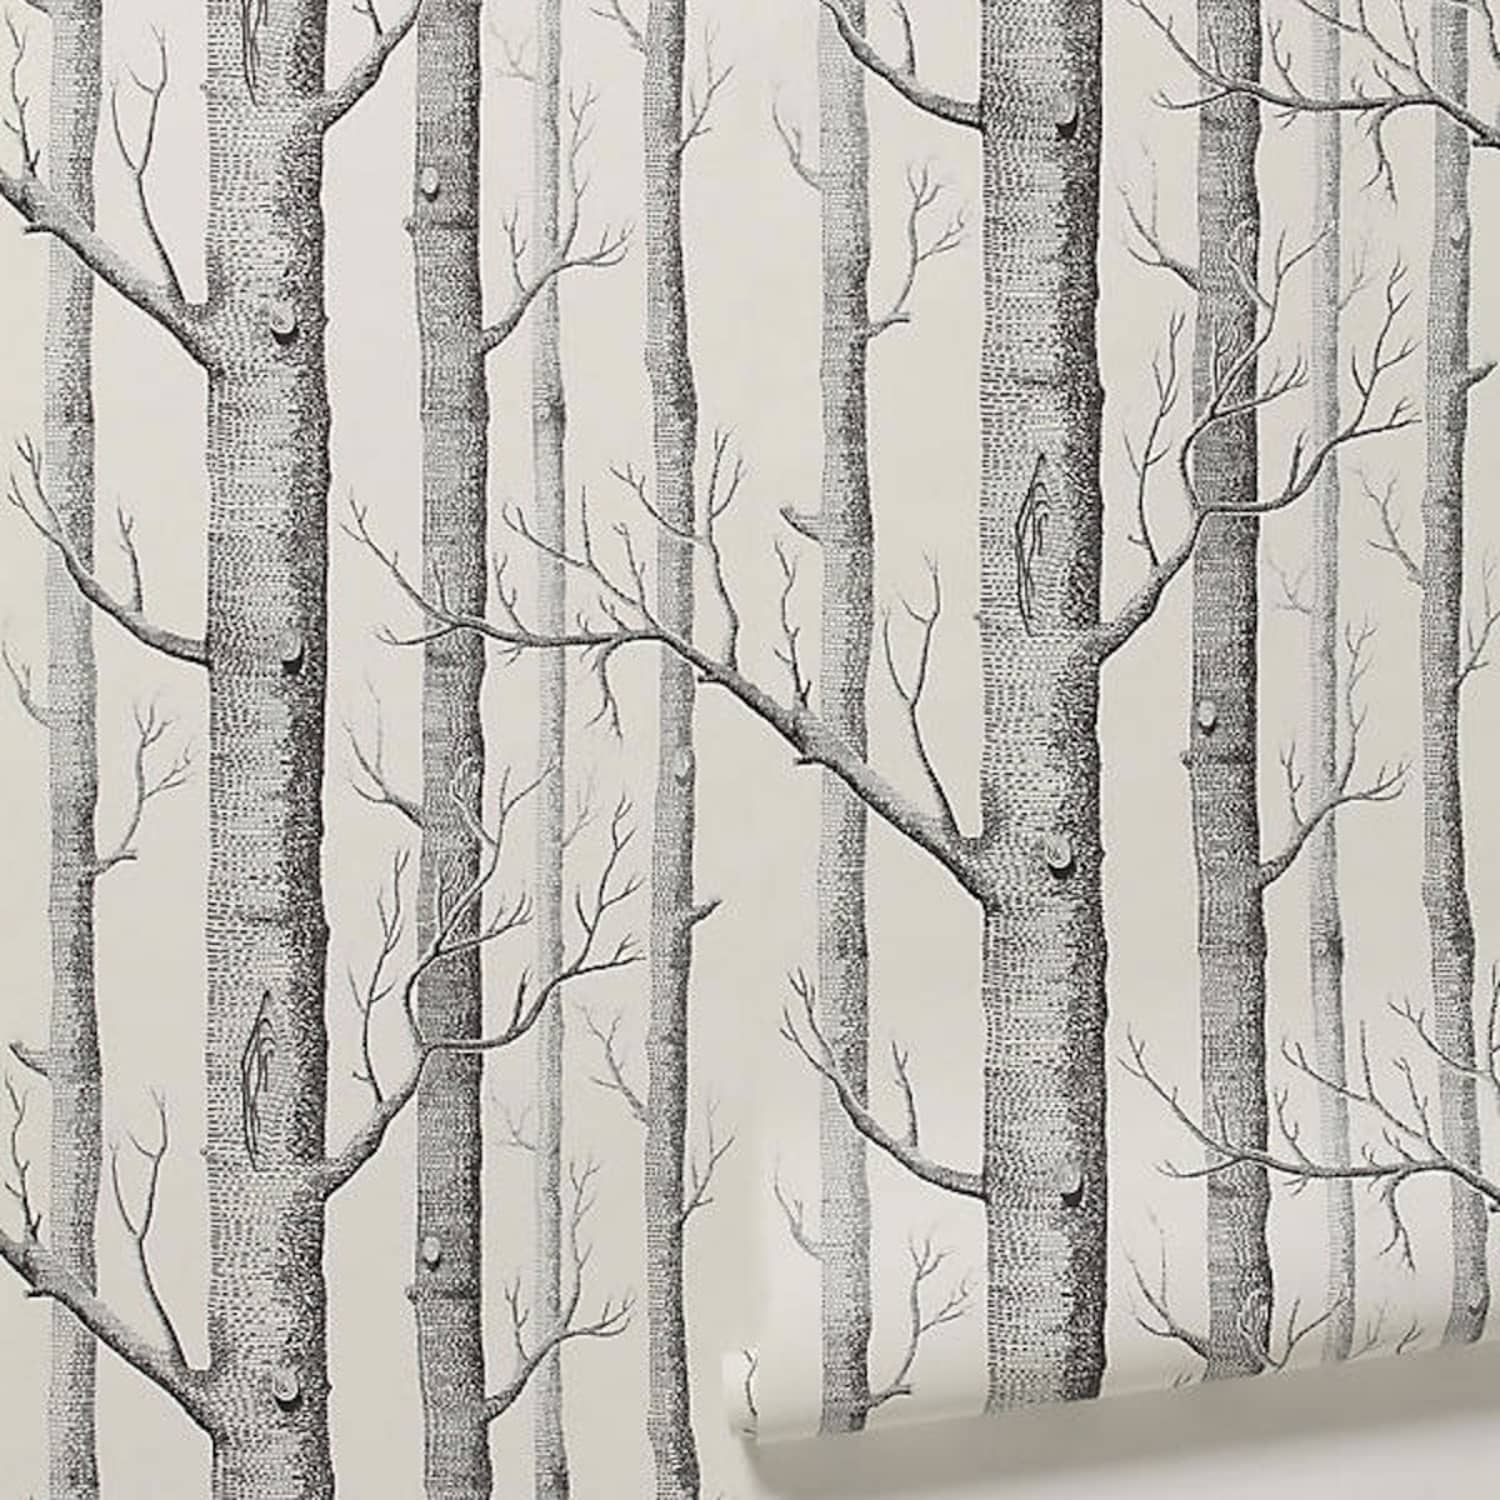 10 Excellent Sources for Buying Birch Tree Wallpaper | Apartment Therapy